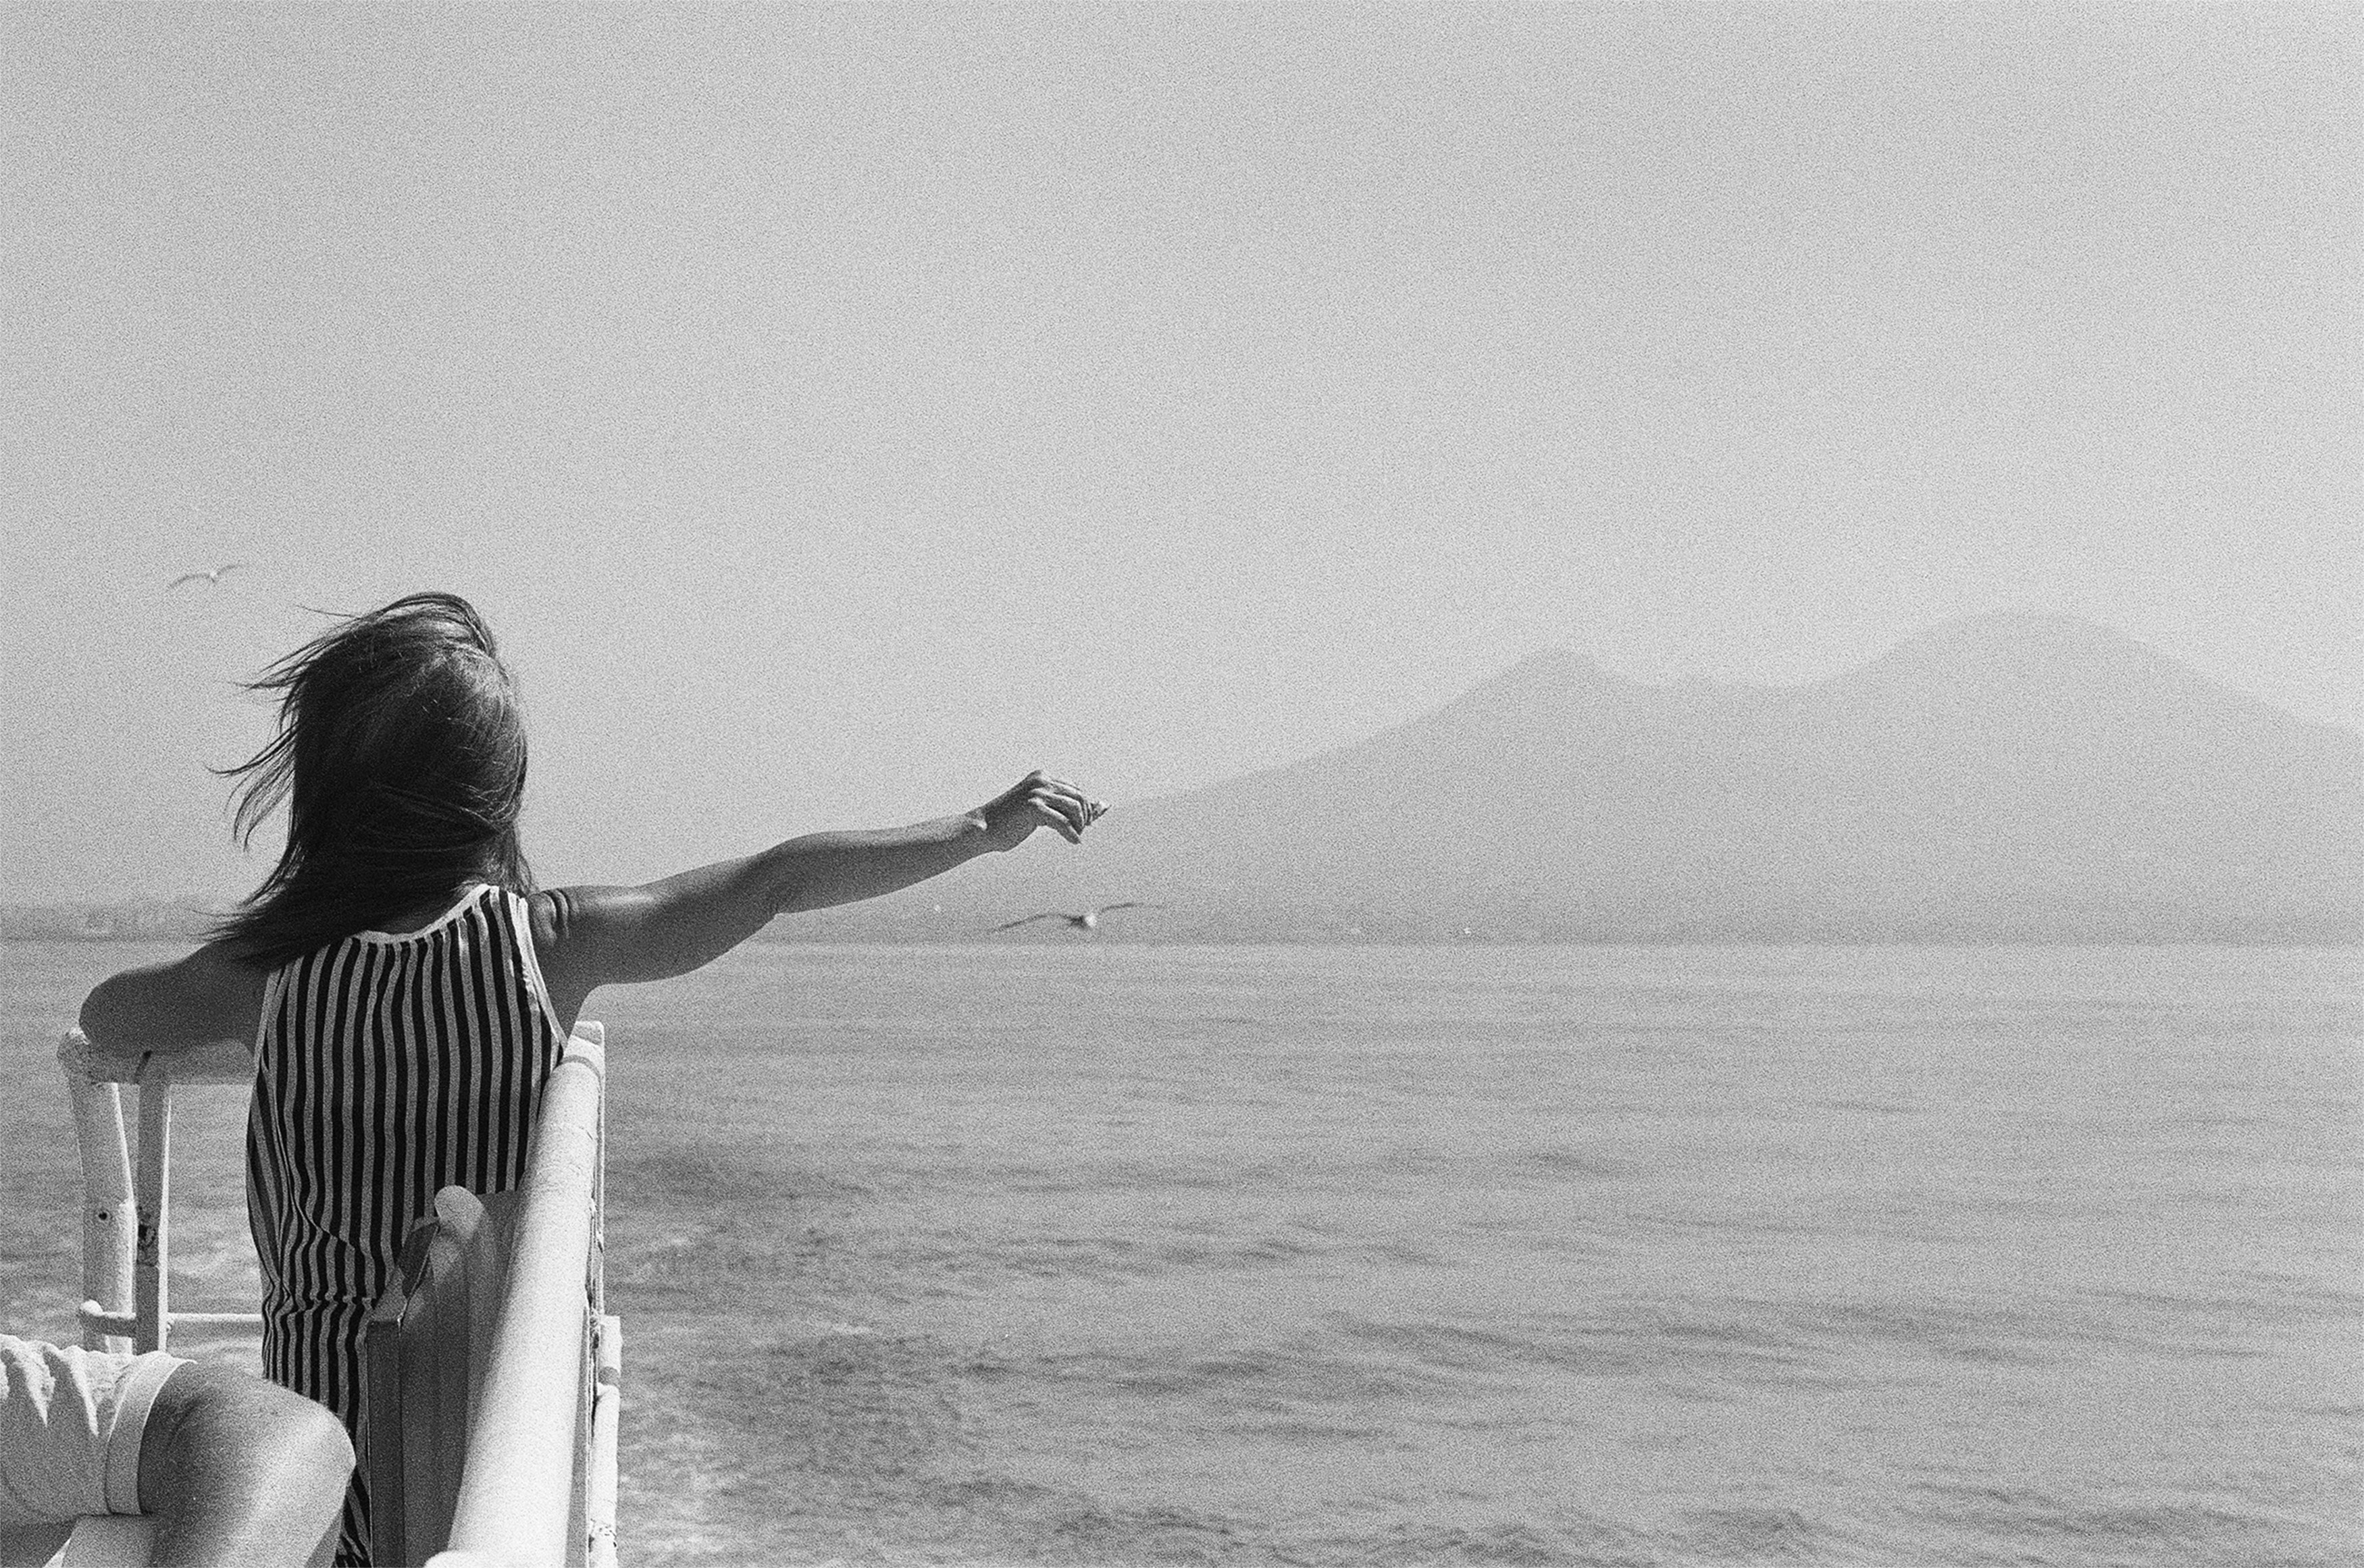 A woman in a boat is drawing the attention of seagulls that are following her. On the background, there is the Vesuvio, the volcano of Naples.